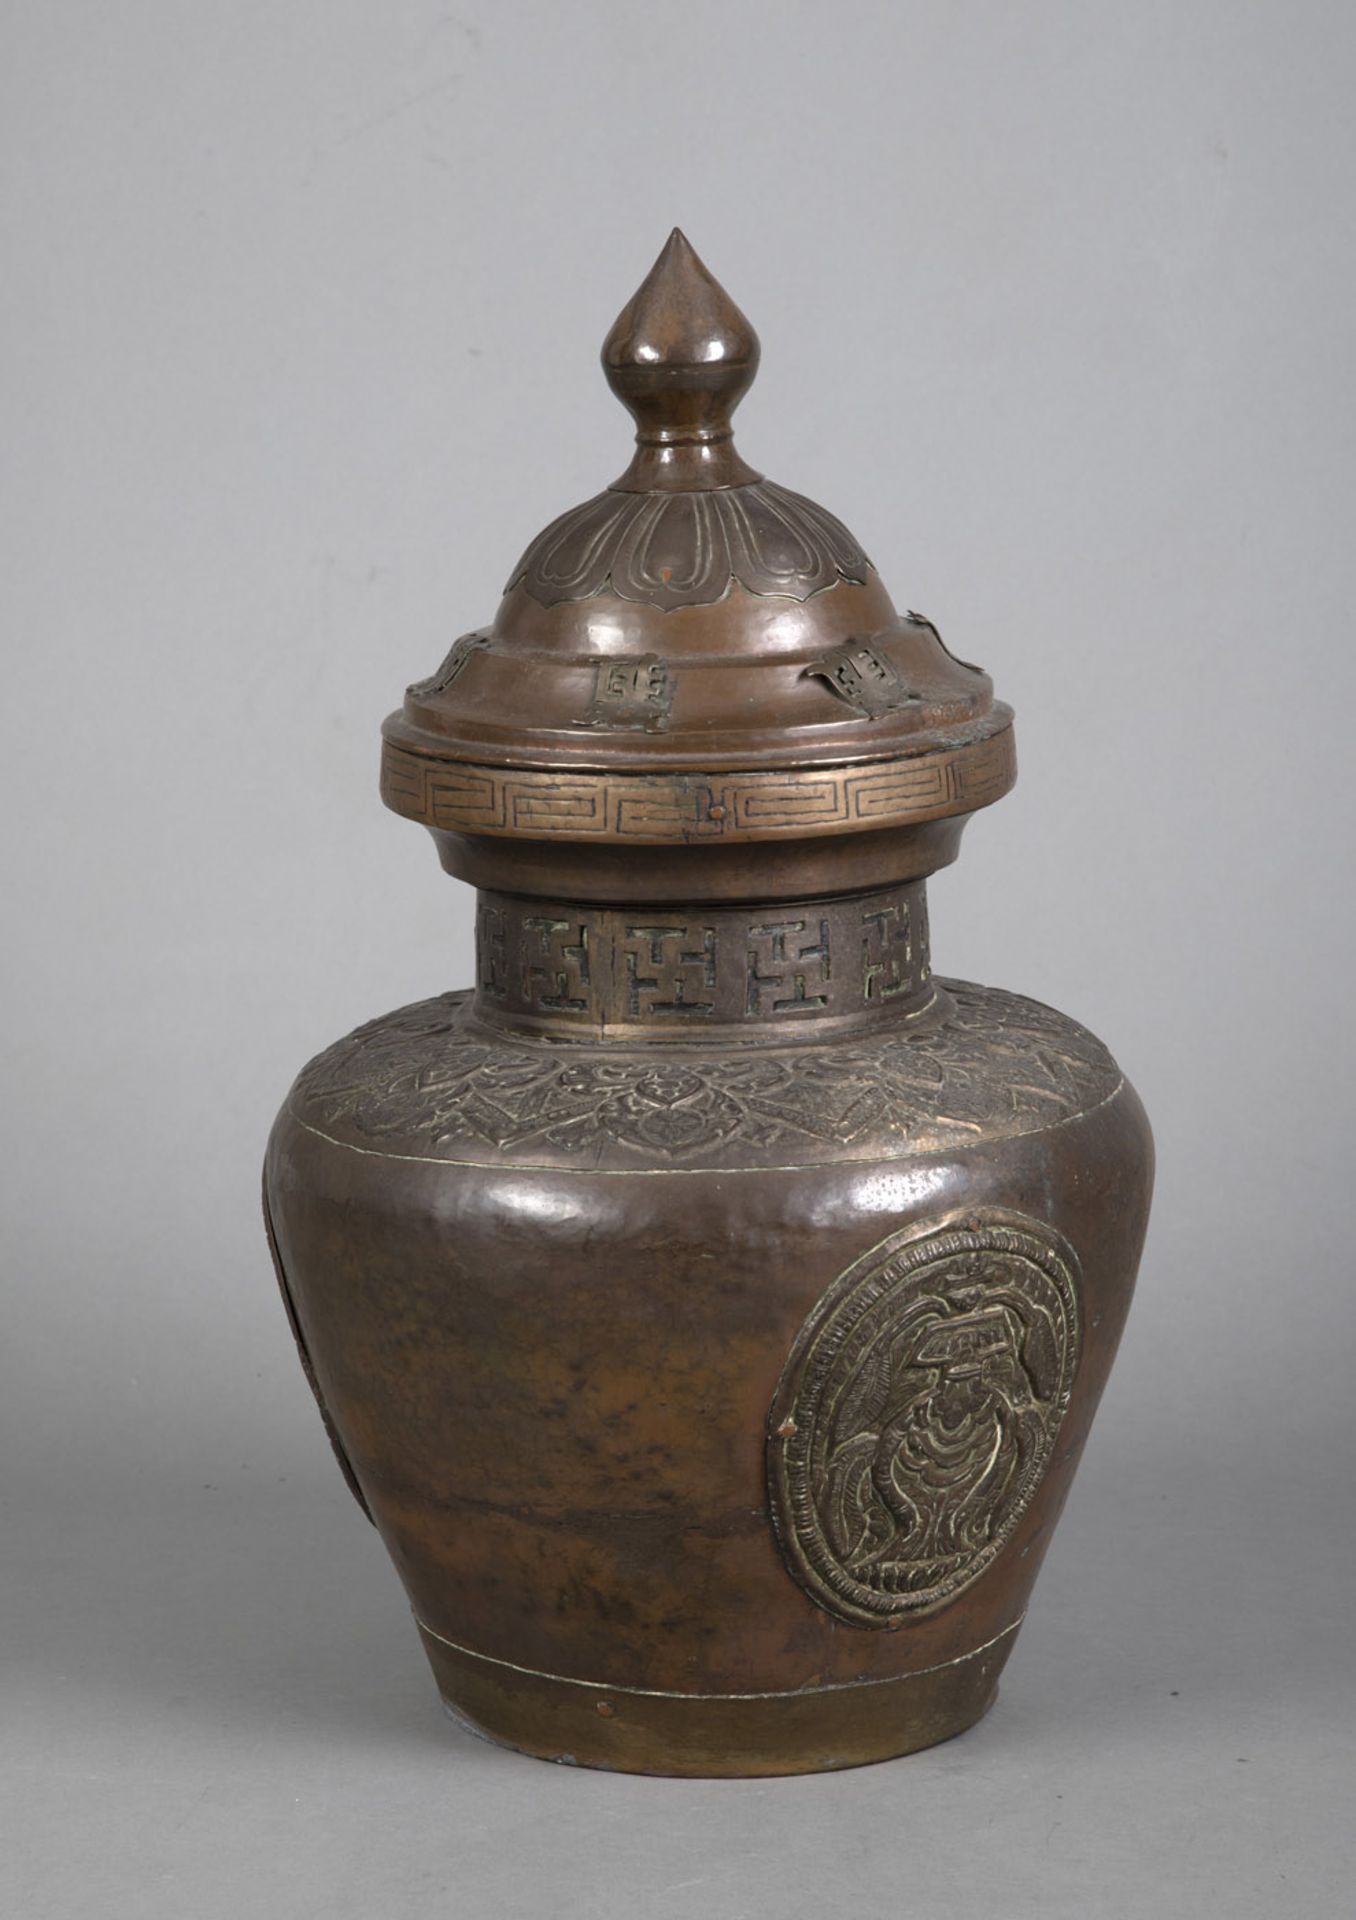 A LARGE EMBOSSED COPPER AND BRASS STORAGE VESSEL WITH SURROUNDING SWASTIKA AND "SHOU" CHARACTER DEC - Image 2 of 4